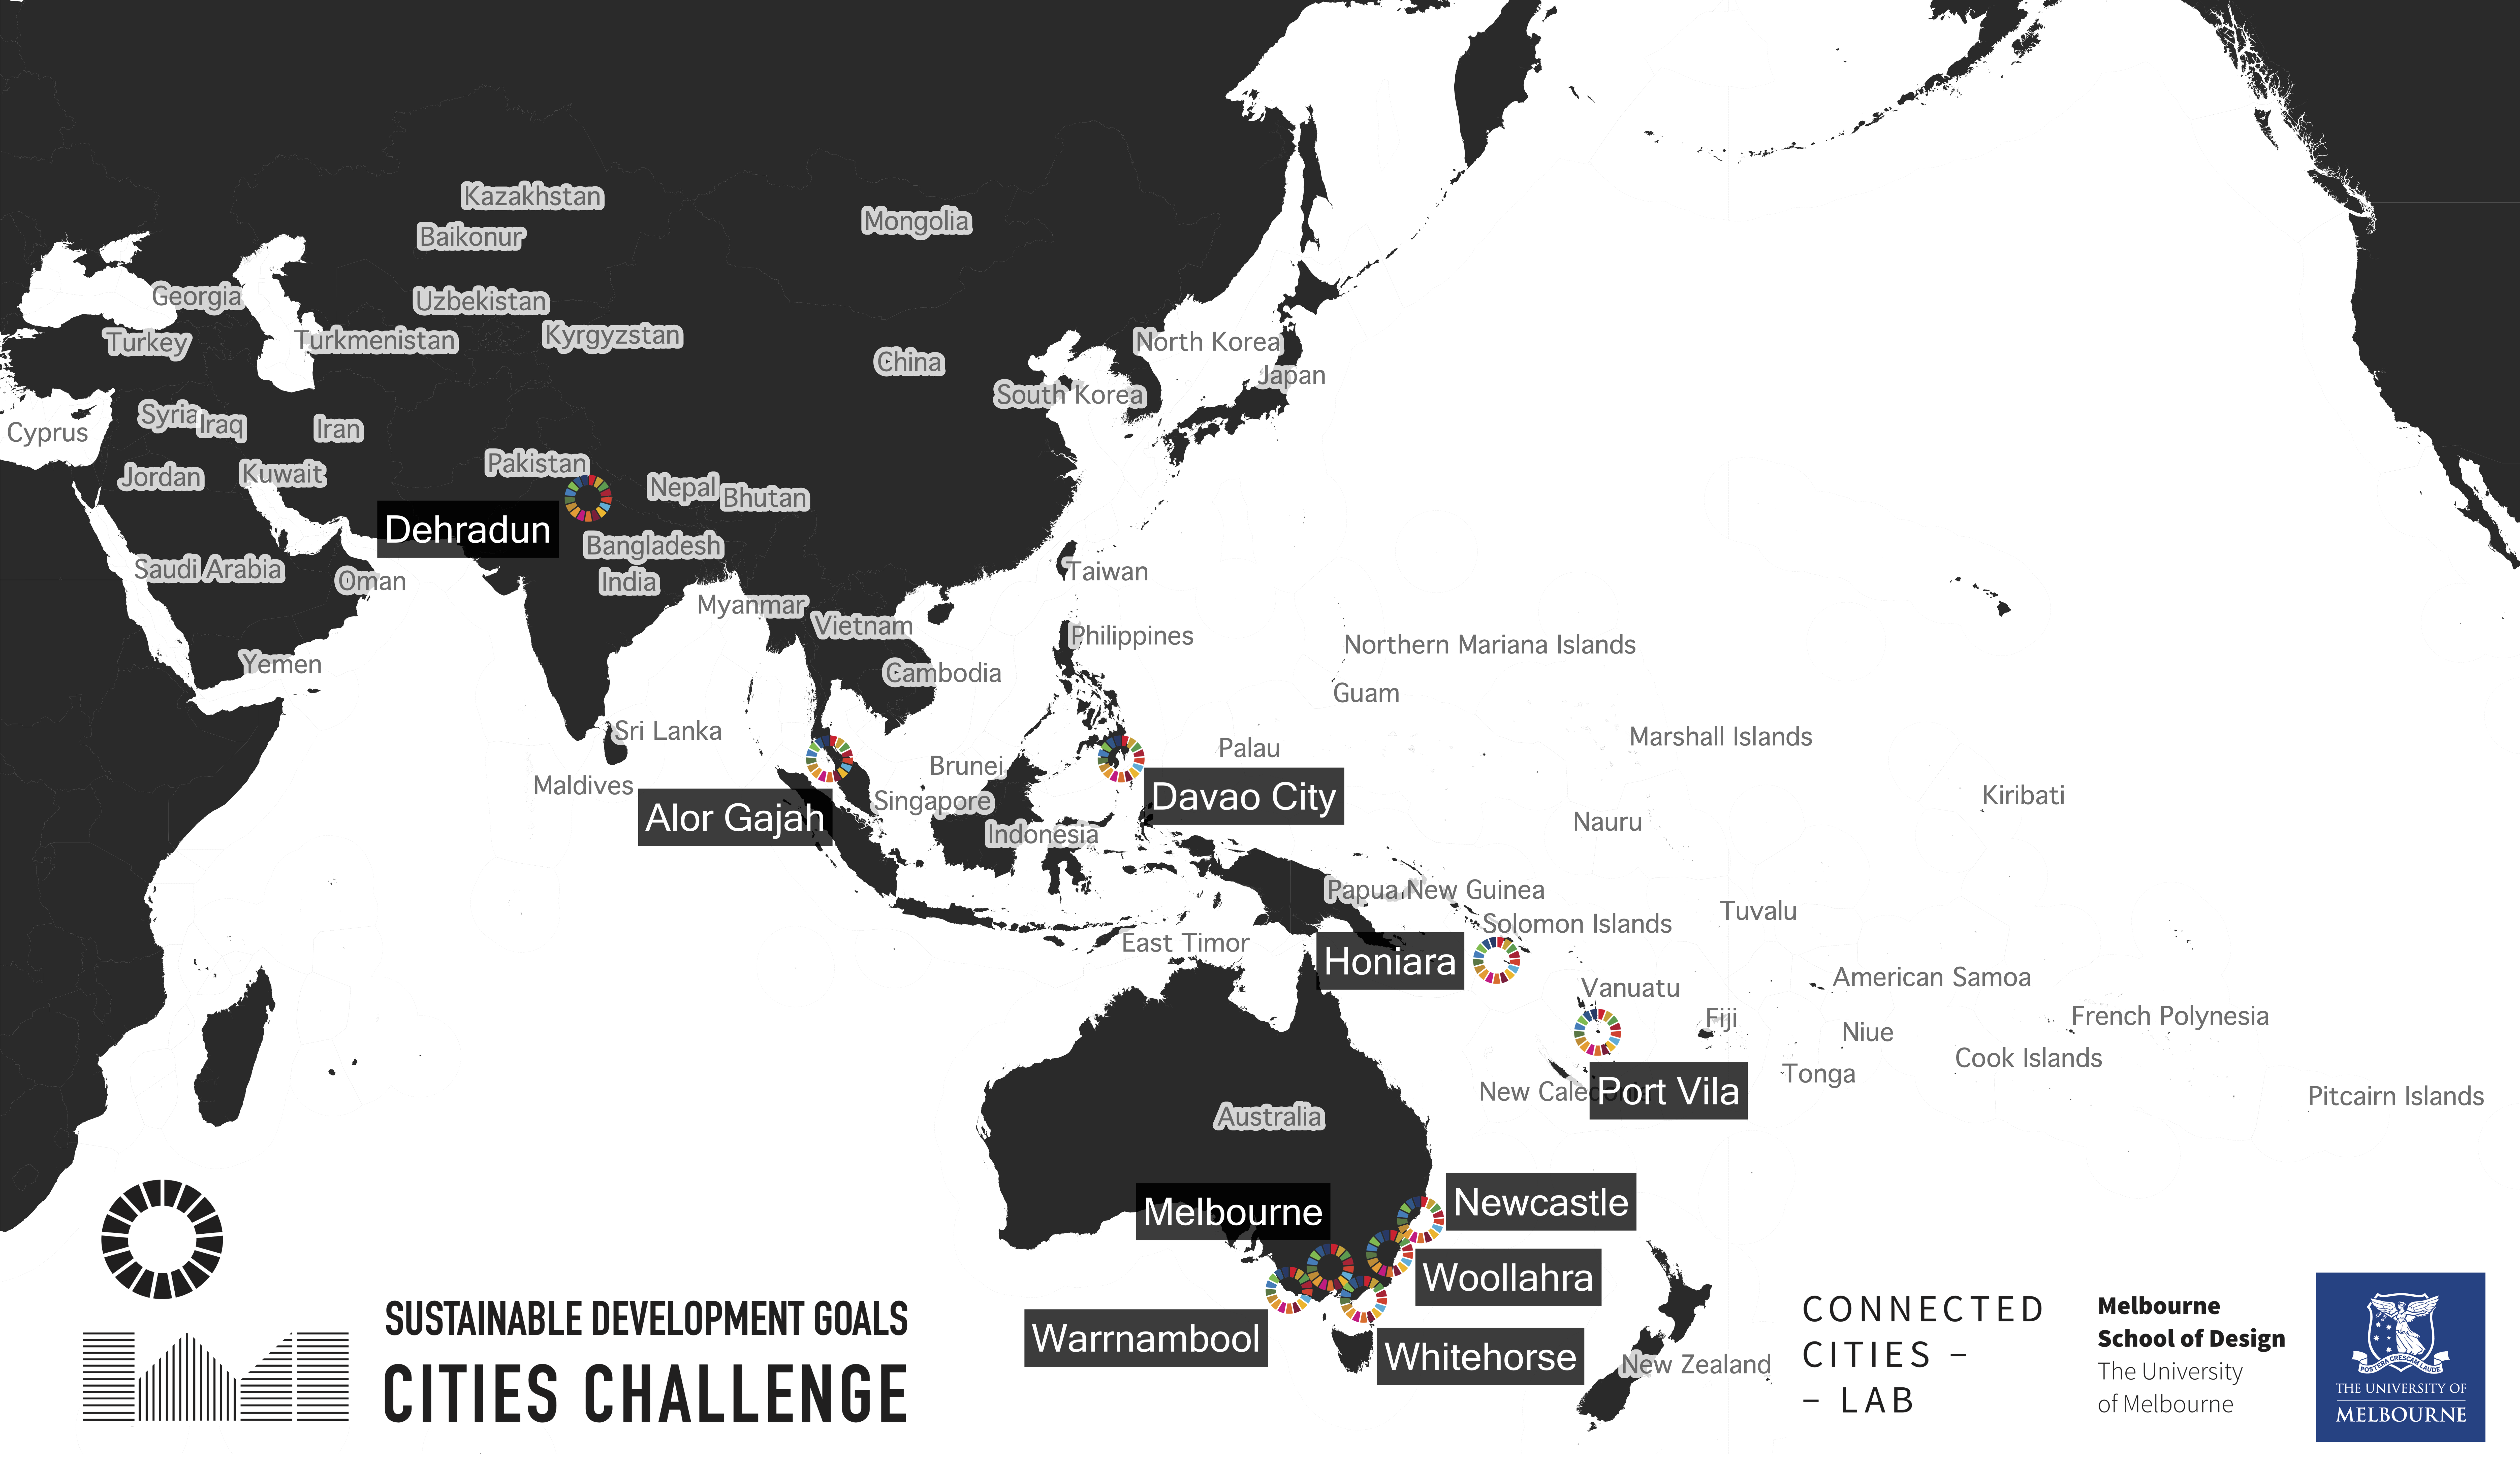 SDGs Cities Challenge Map - Connected Cities Lab